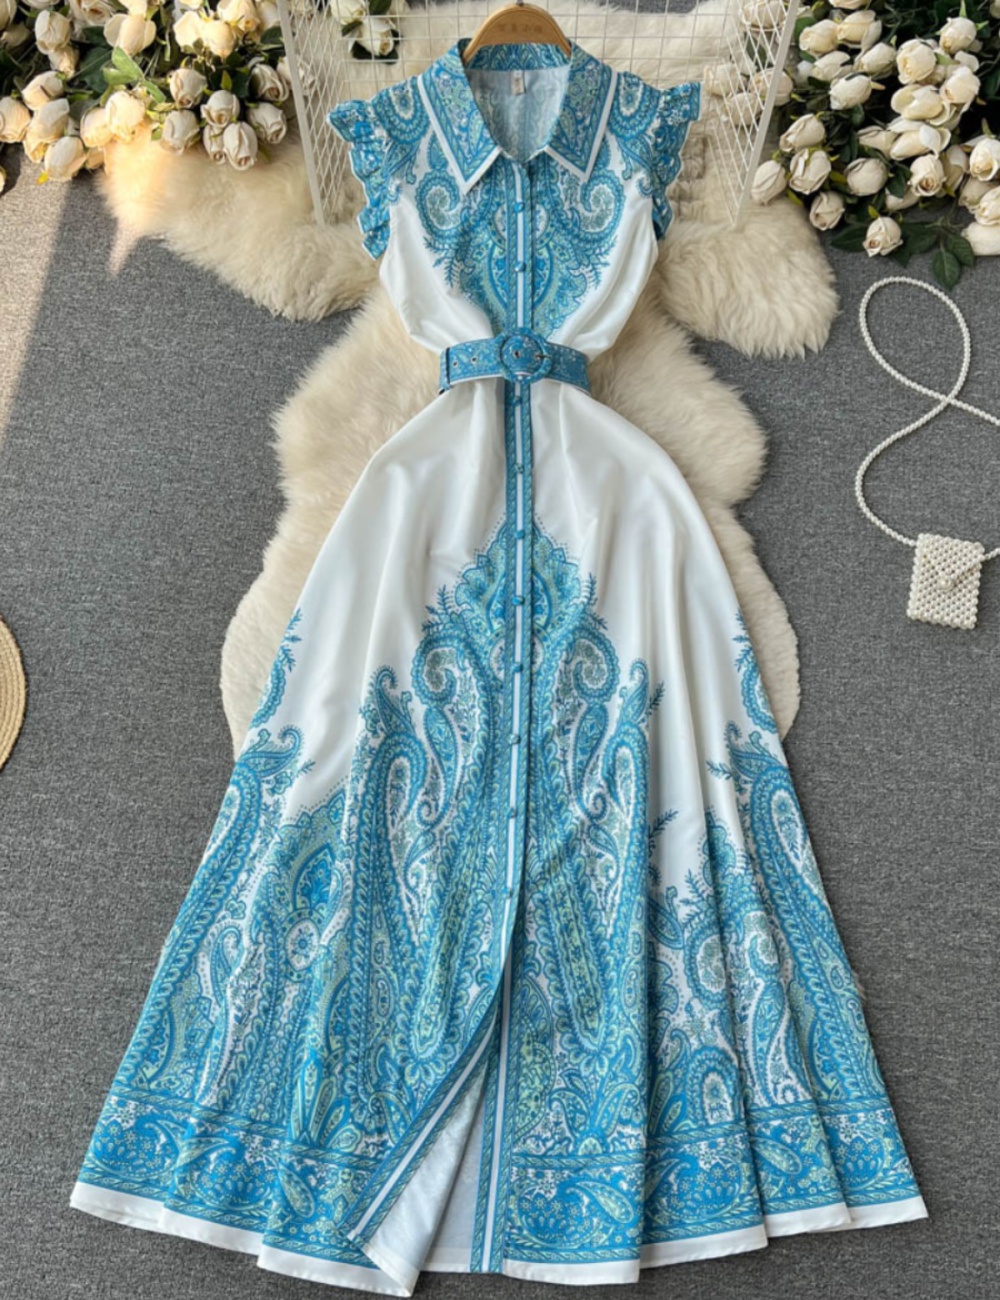 Lapel France style pinched waist long printing dress